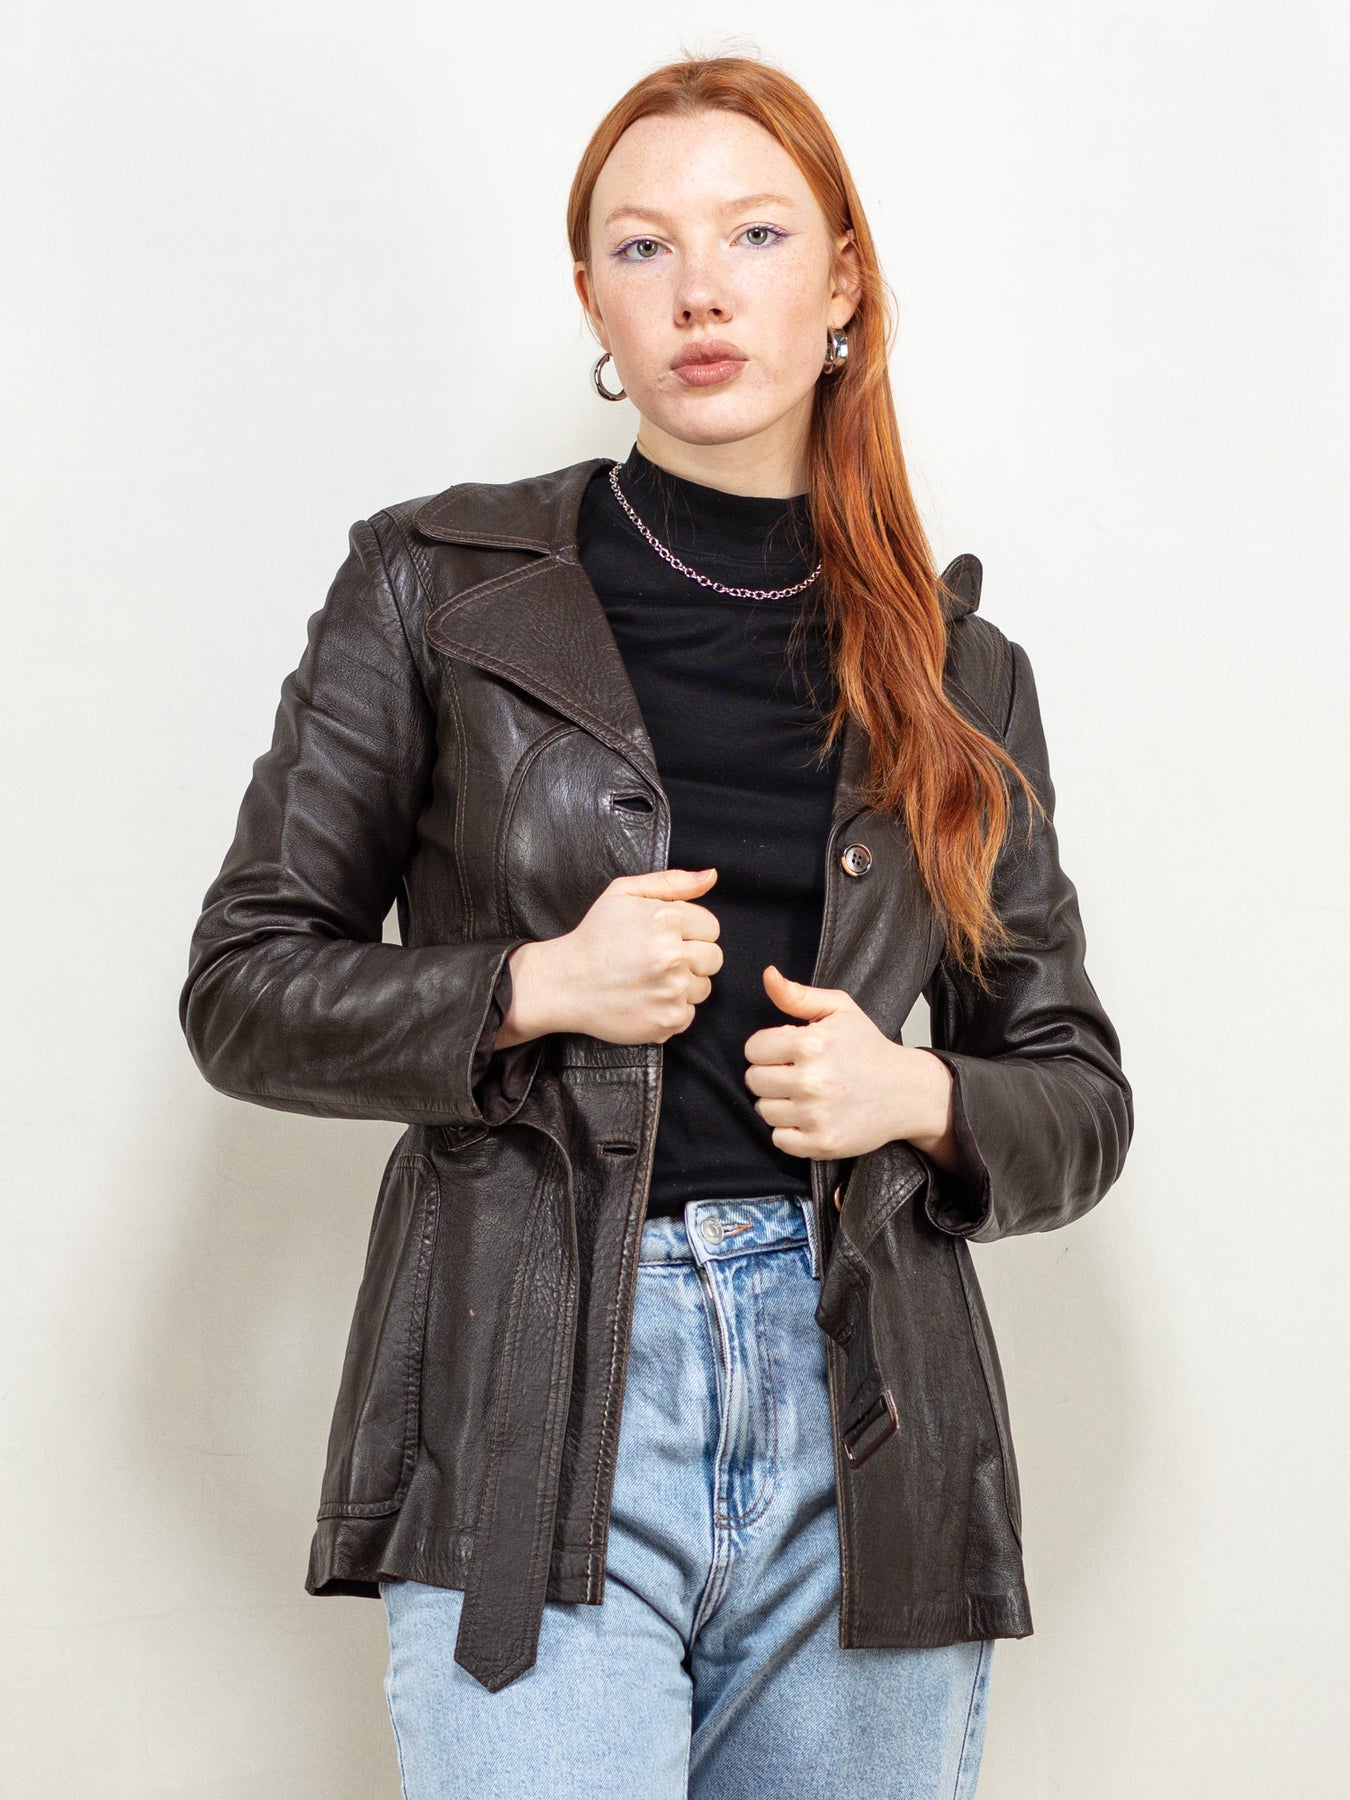 Online Vintage Store   s Women Leather Jacket   Norther Grip